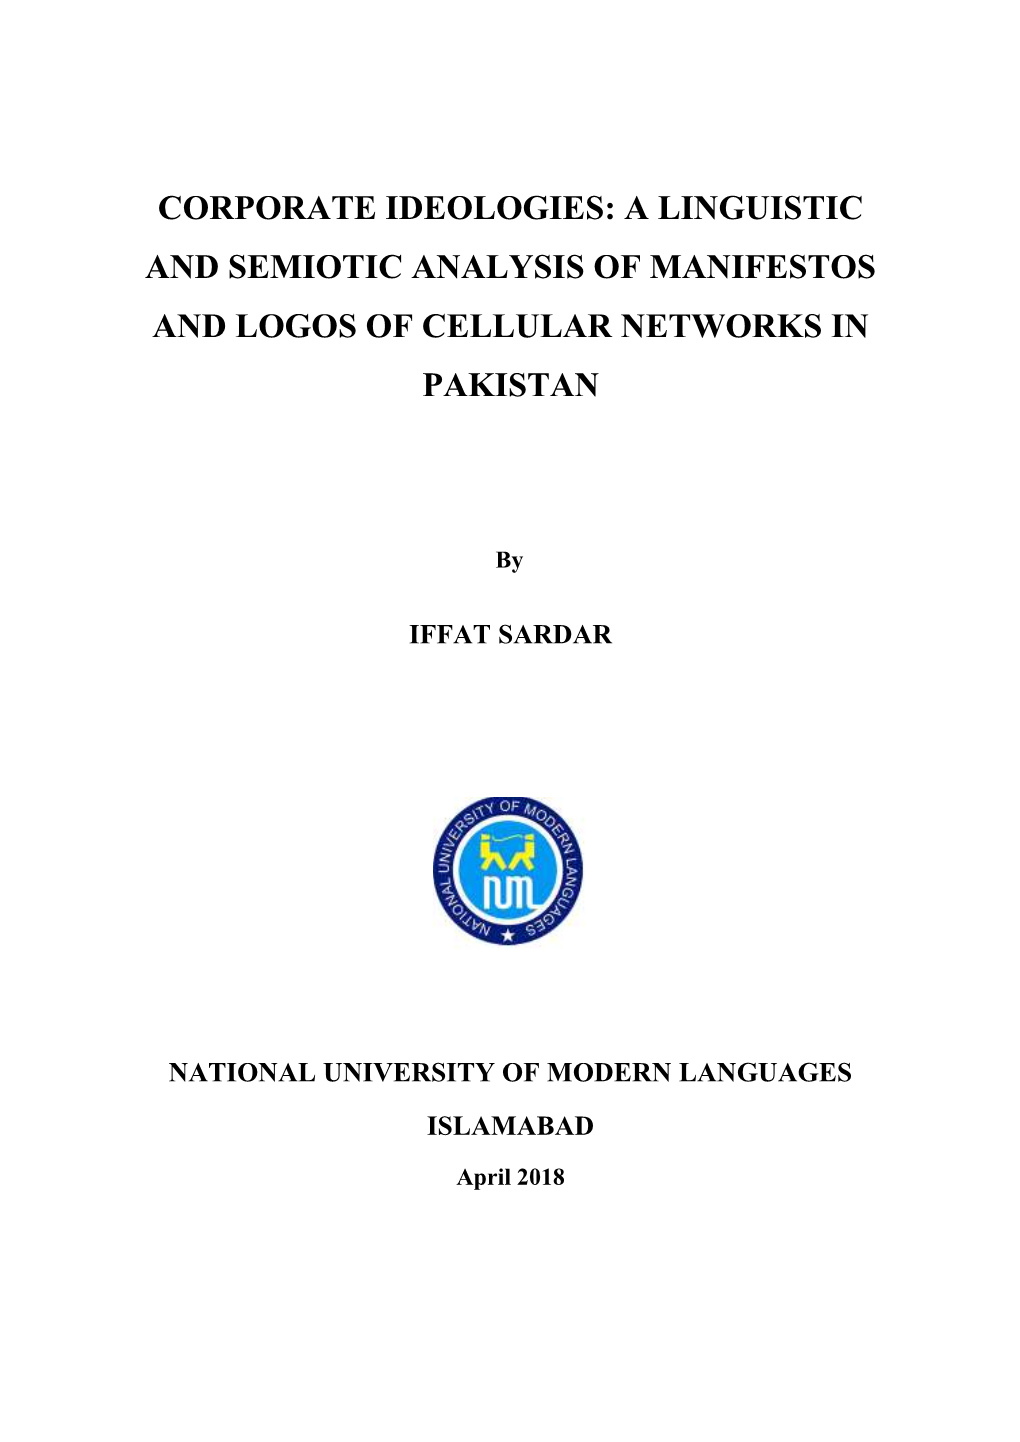 Corporate Ideologies: a Linguistic and Semiotic Analysis of Manifestos and Logos of Cellular Networks in Pakistan